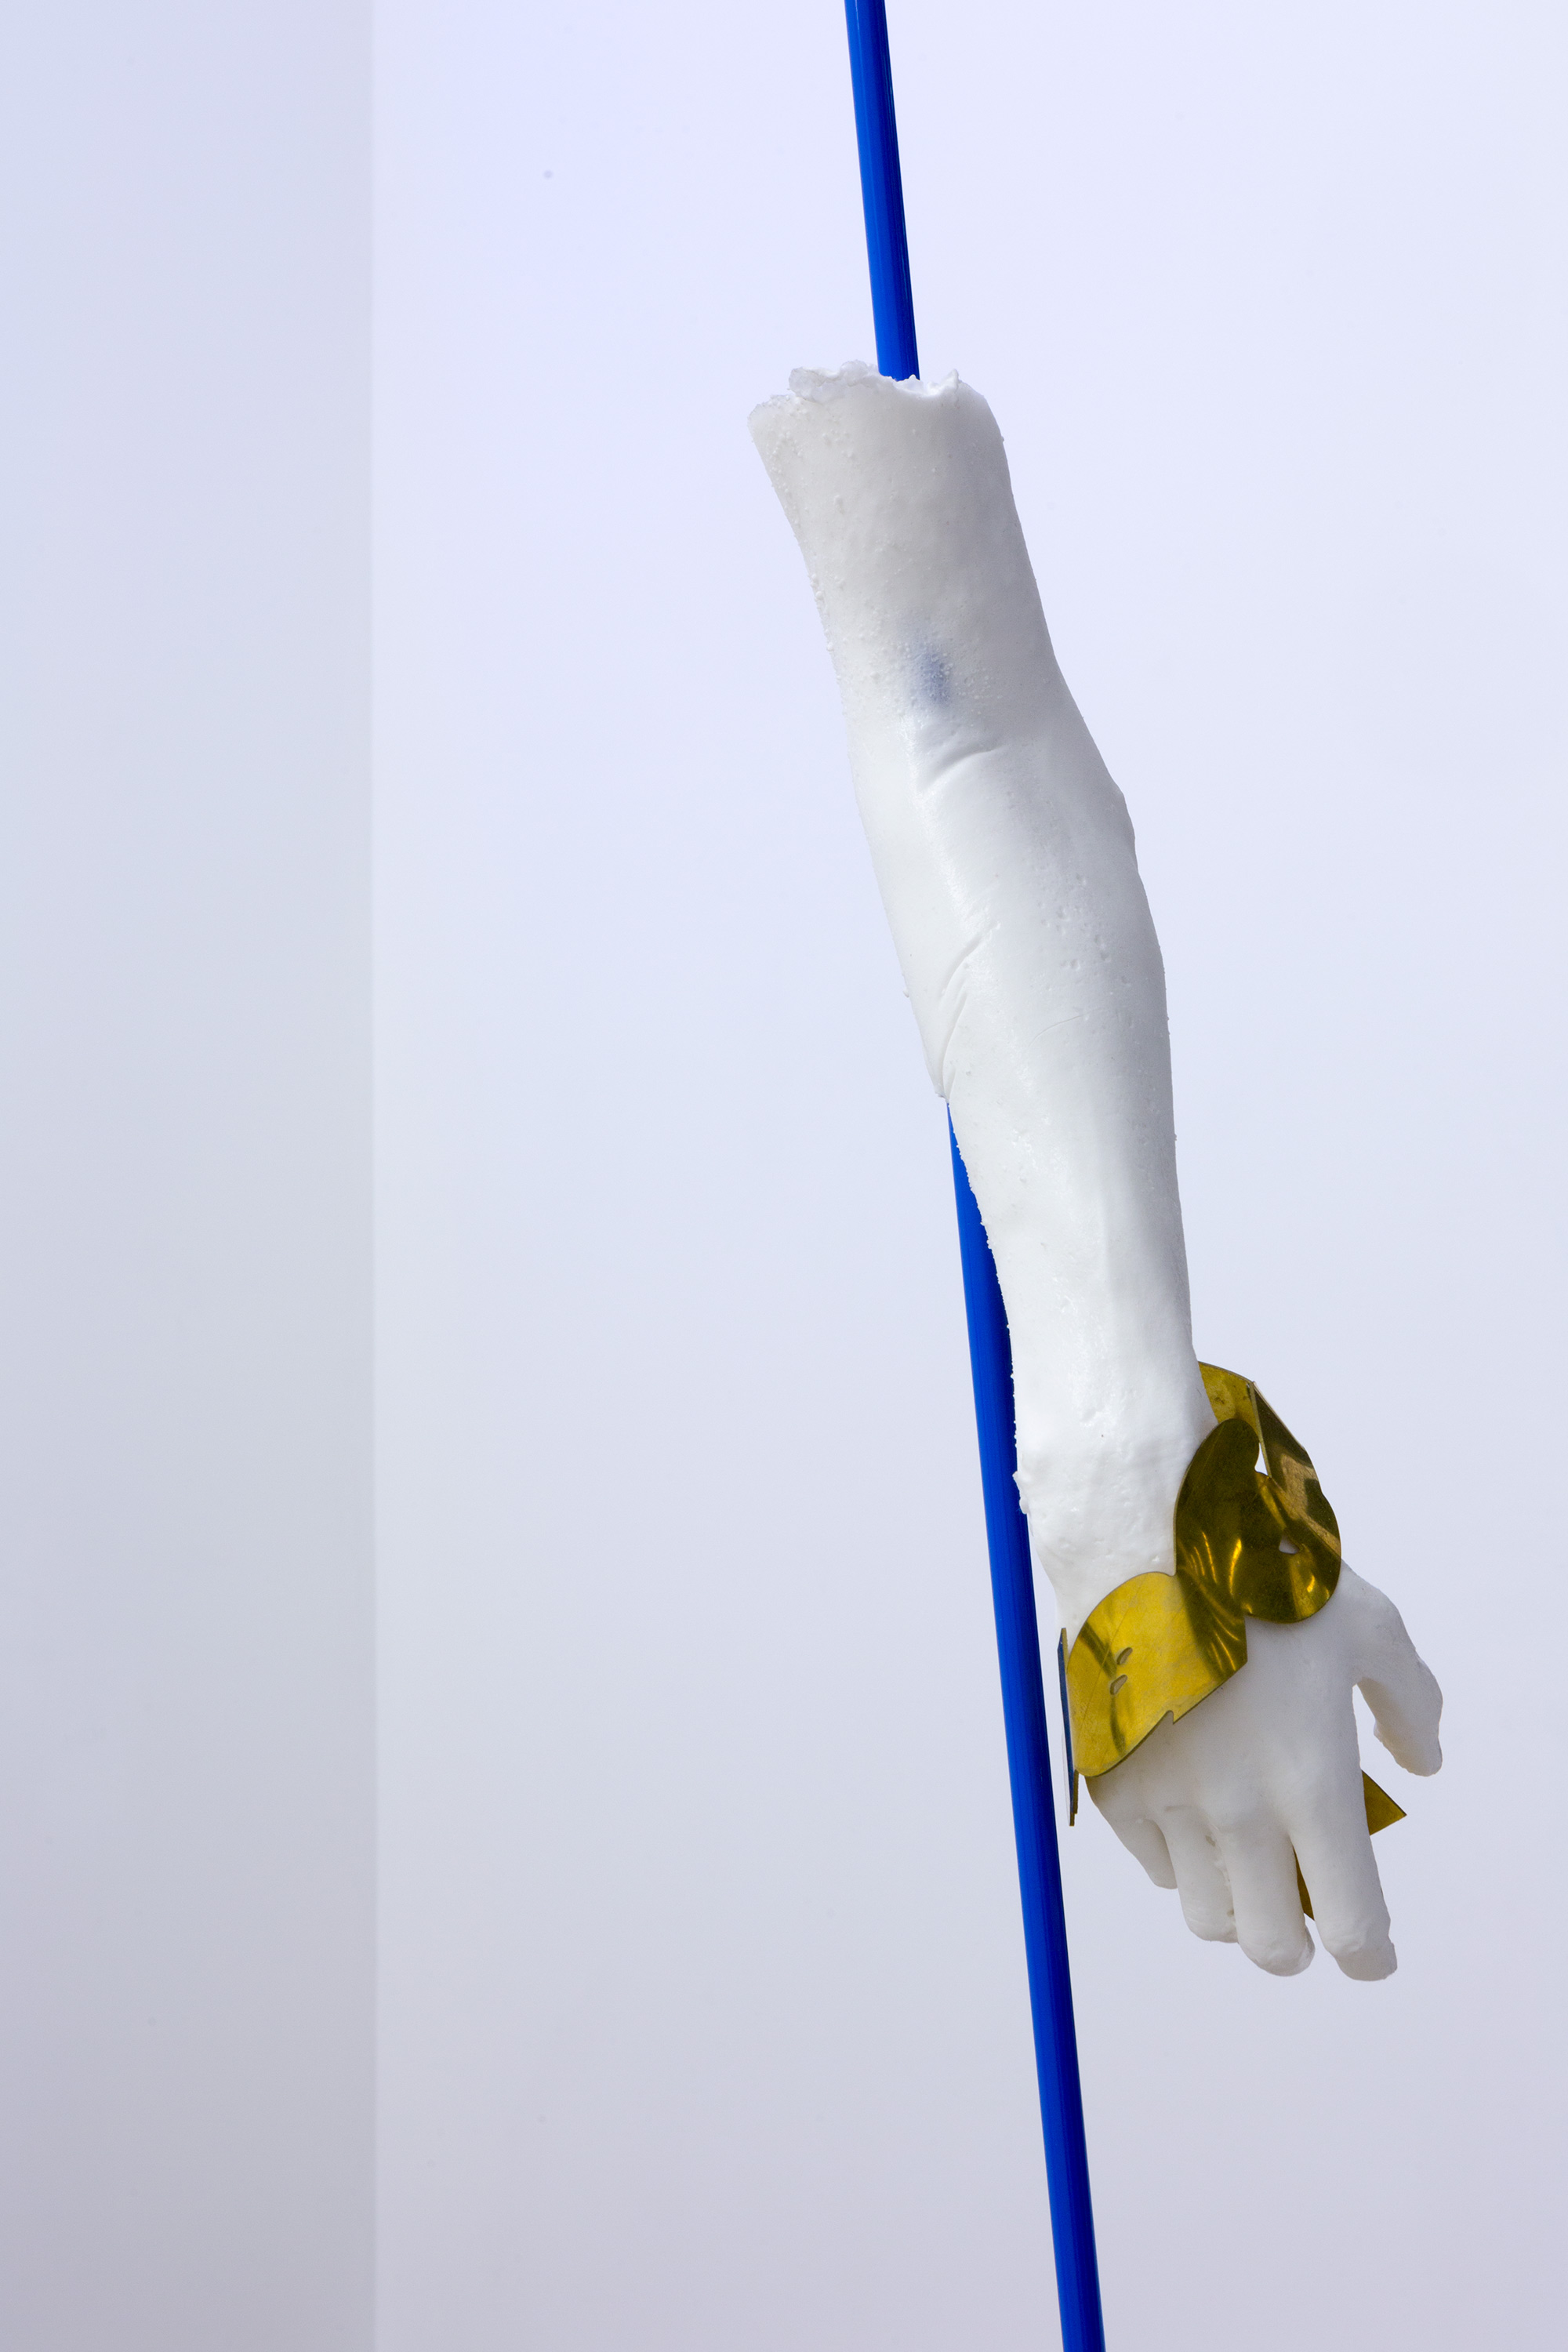 "Sculpture for corporate HQ - iFucked human arm", 2016, brass, powder coated steel, Gel 10 silicone, pigment, dimensions variable